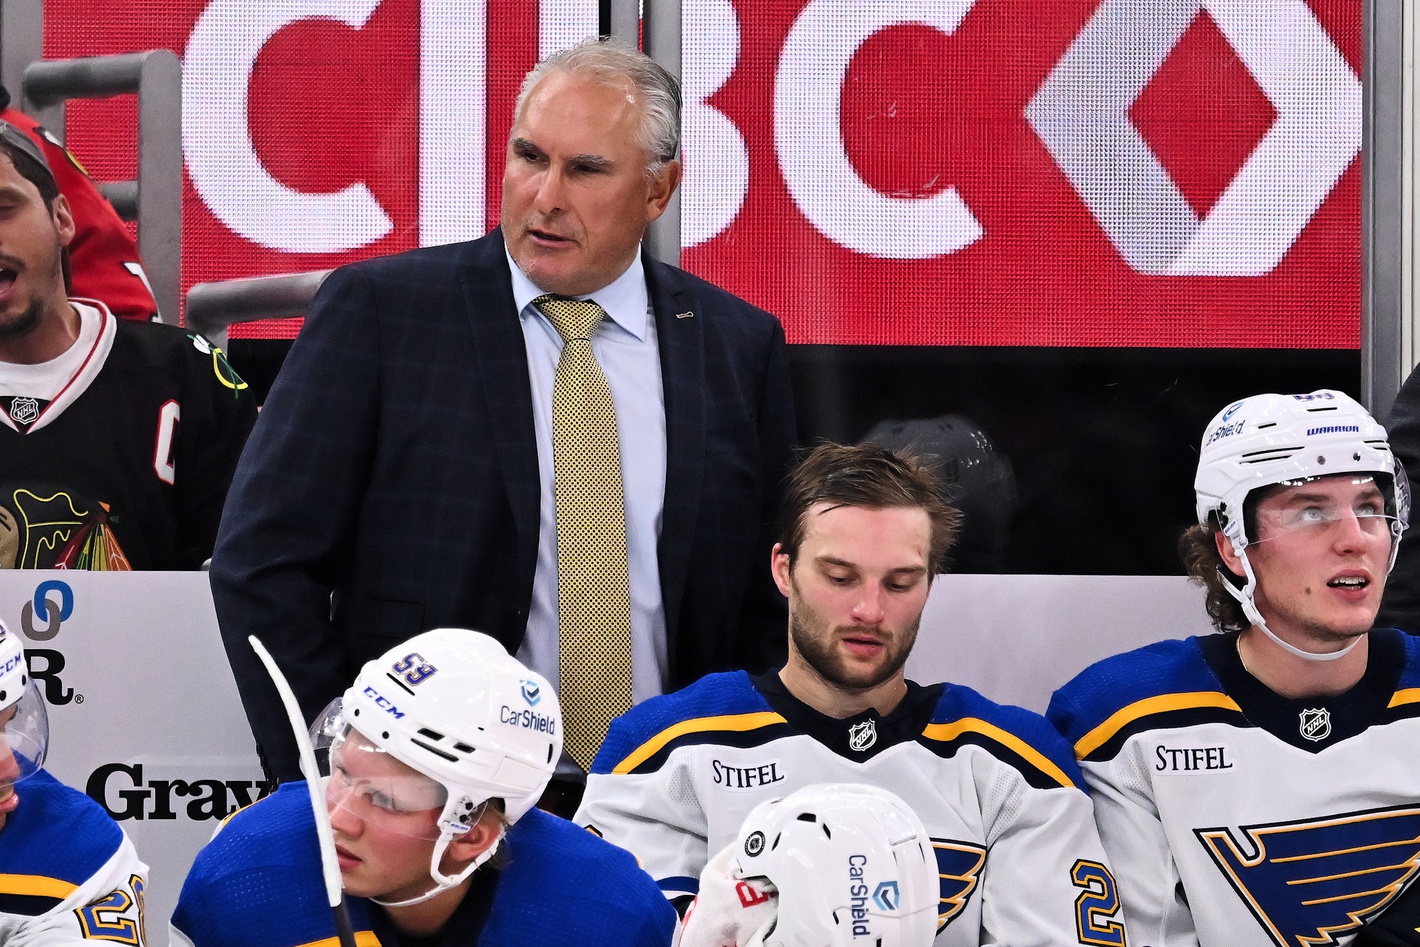 St. Louis Blues 2021-2022 Opening Night roster